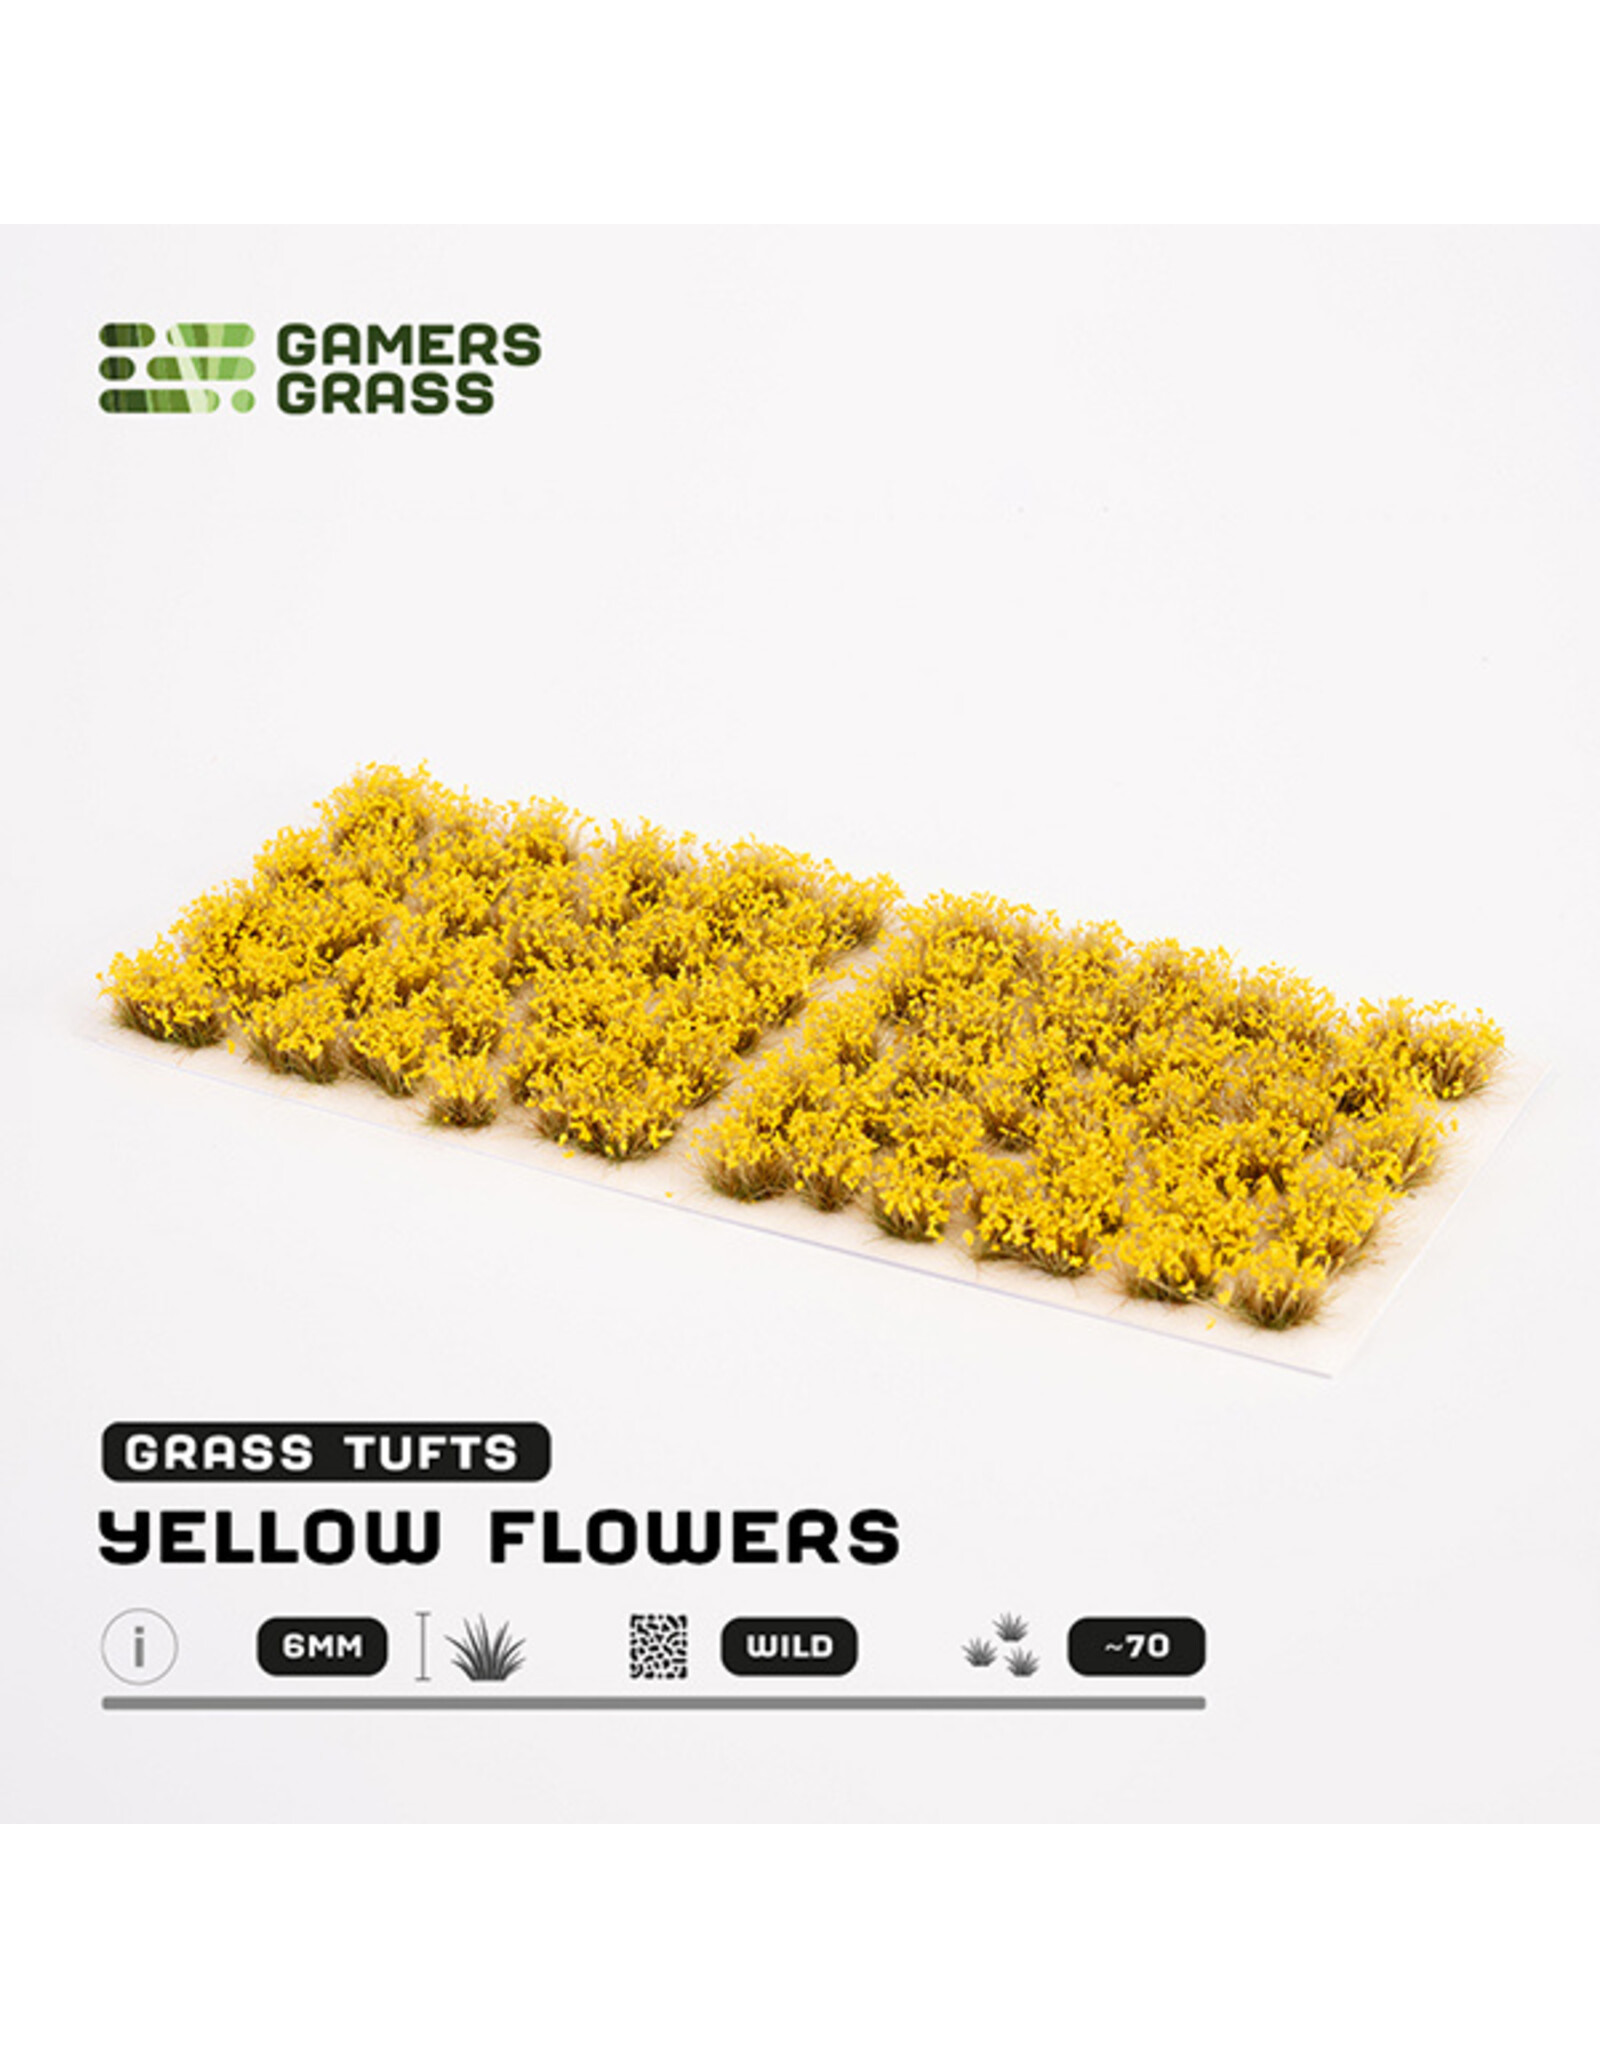 Gamers Grass Gamers Grass Tufts: Tufts- Yellow Flowers- Wild